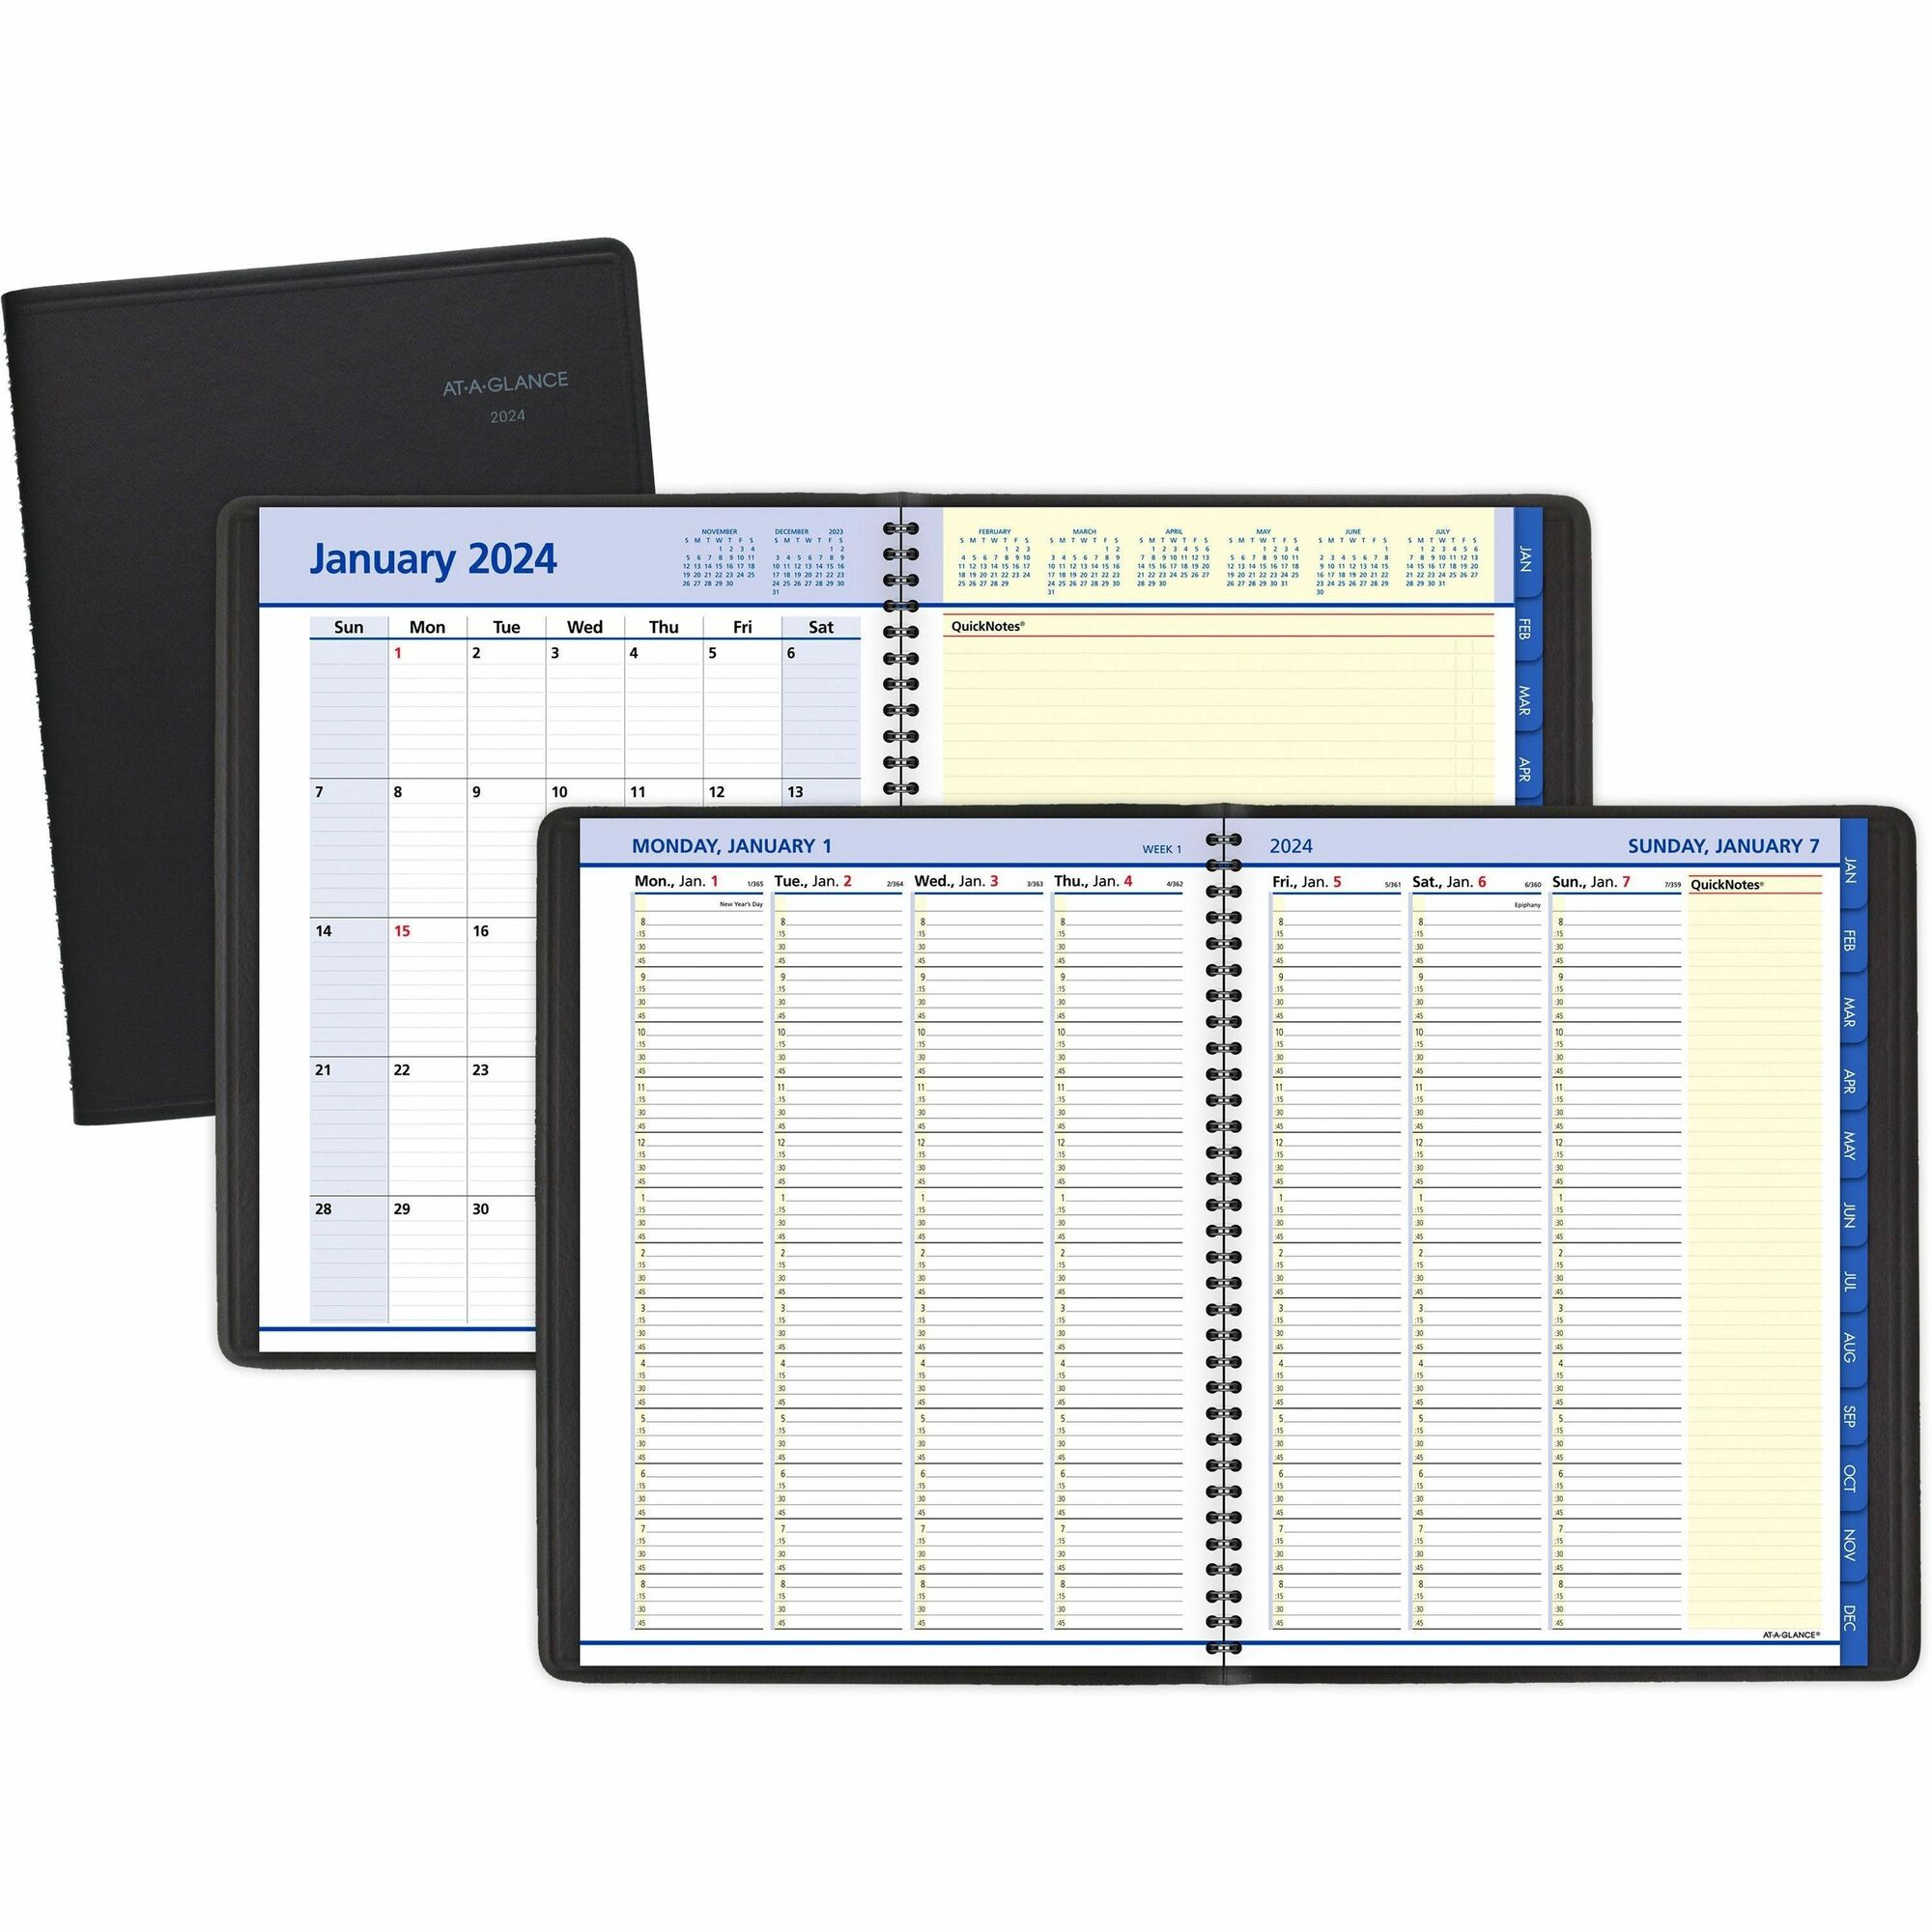 At-A-Glance Quicknotes Weekly/Monthly Appointment Book - Weekly, Monthly - January 2020 till December 2020 - 8:00 AM to 8:45 PM - 1 Week, 1 Month Double Page Layout - 8 1/4